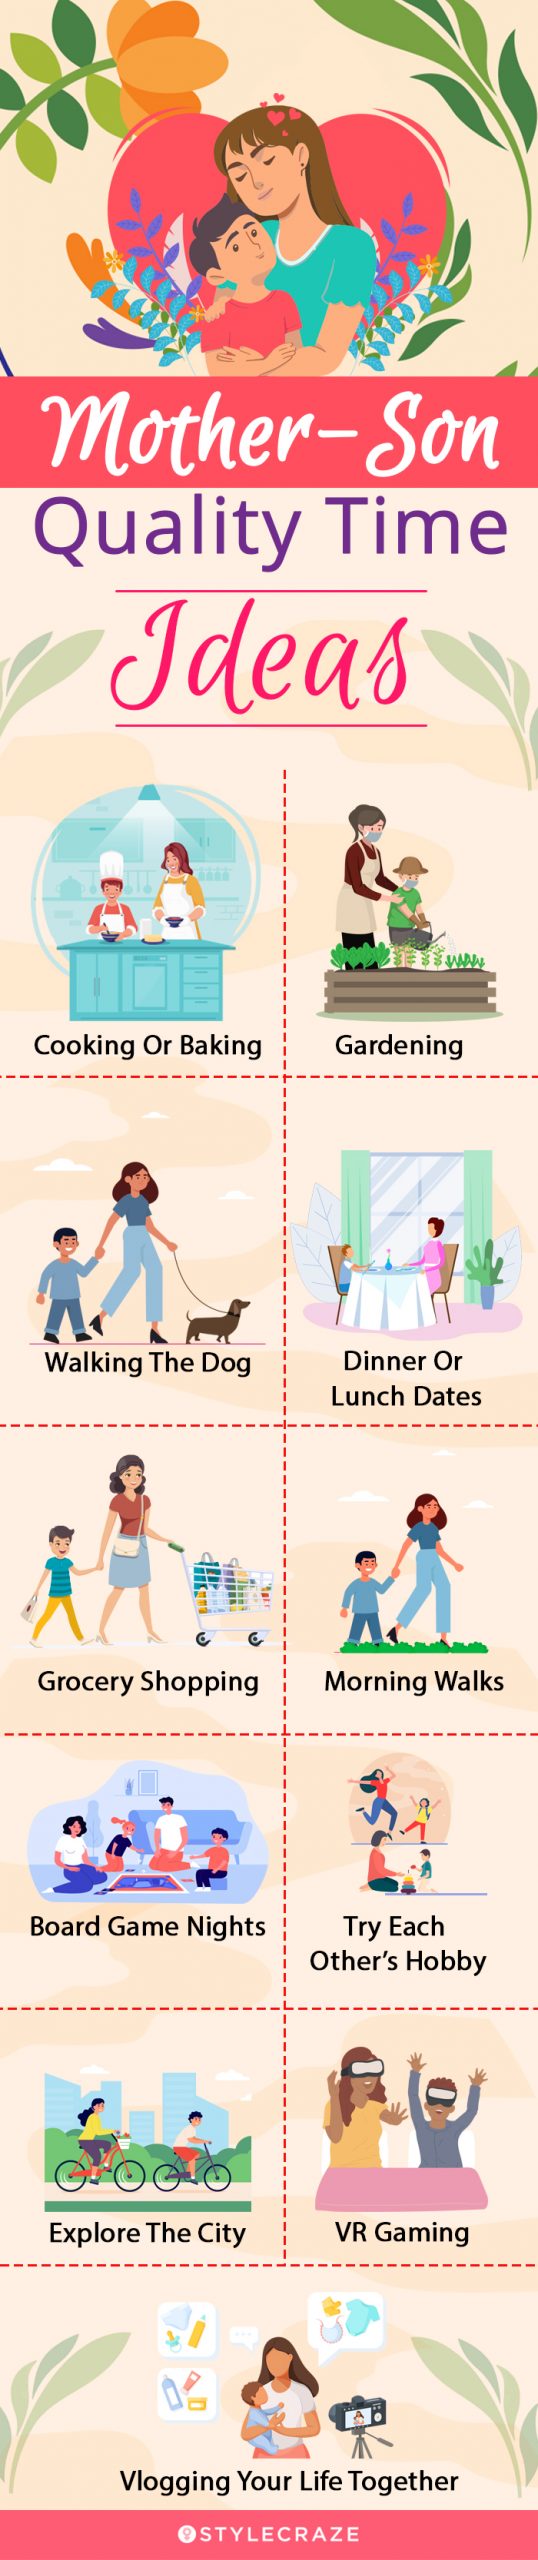 mother son quality time ideas (infographic)